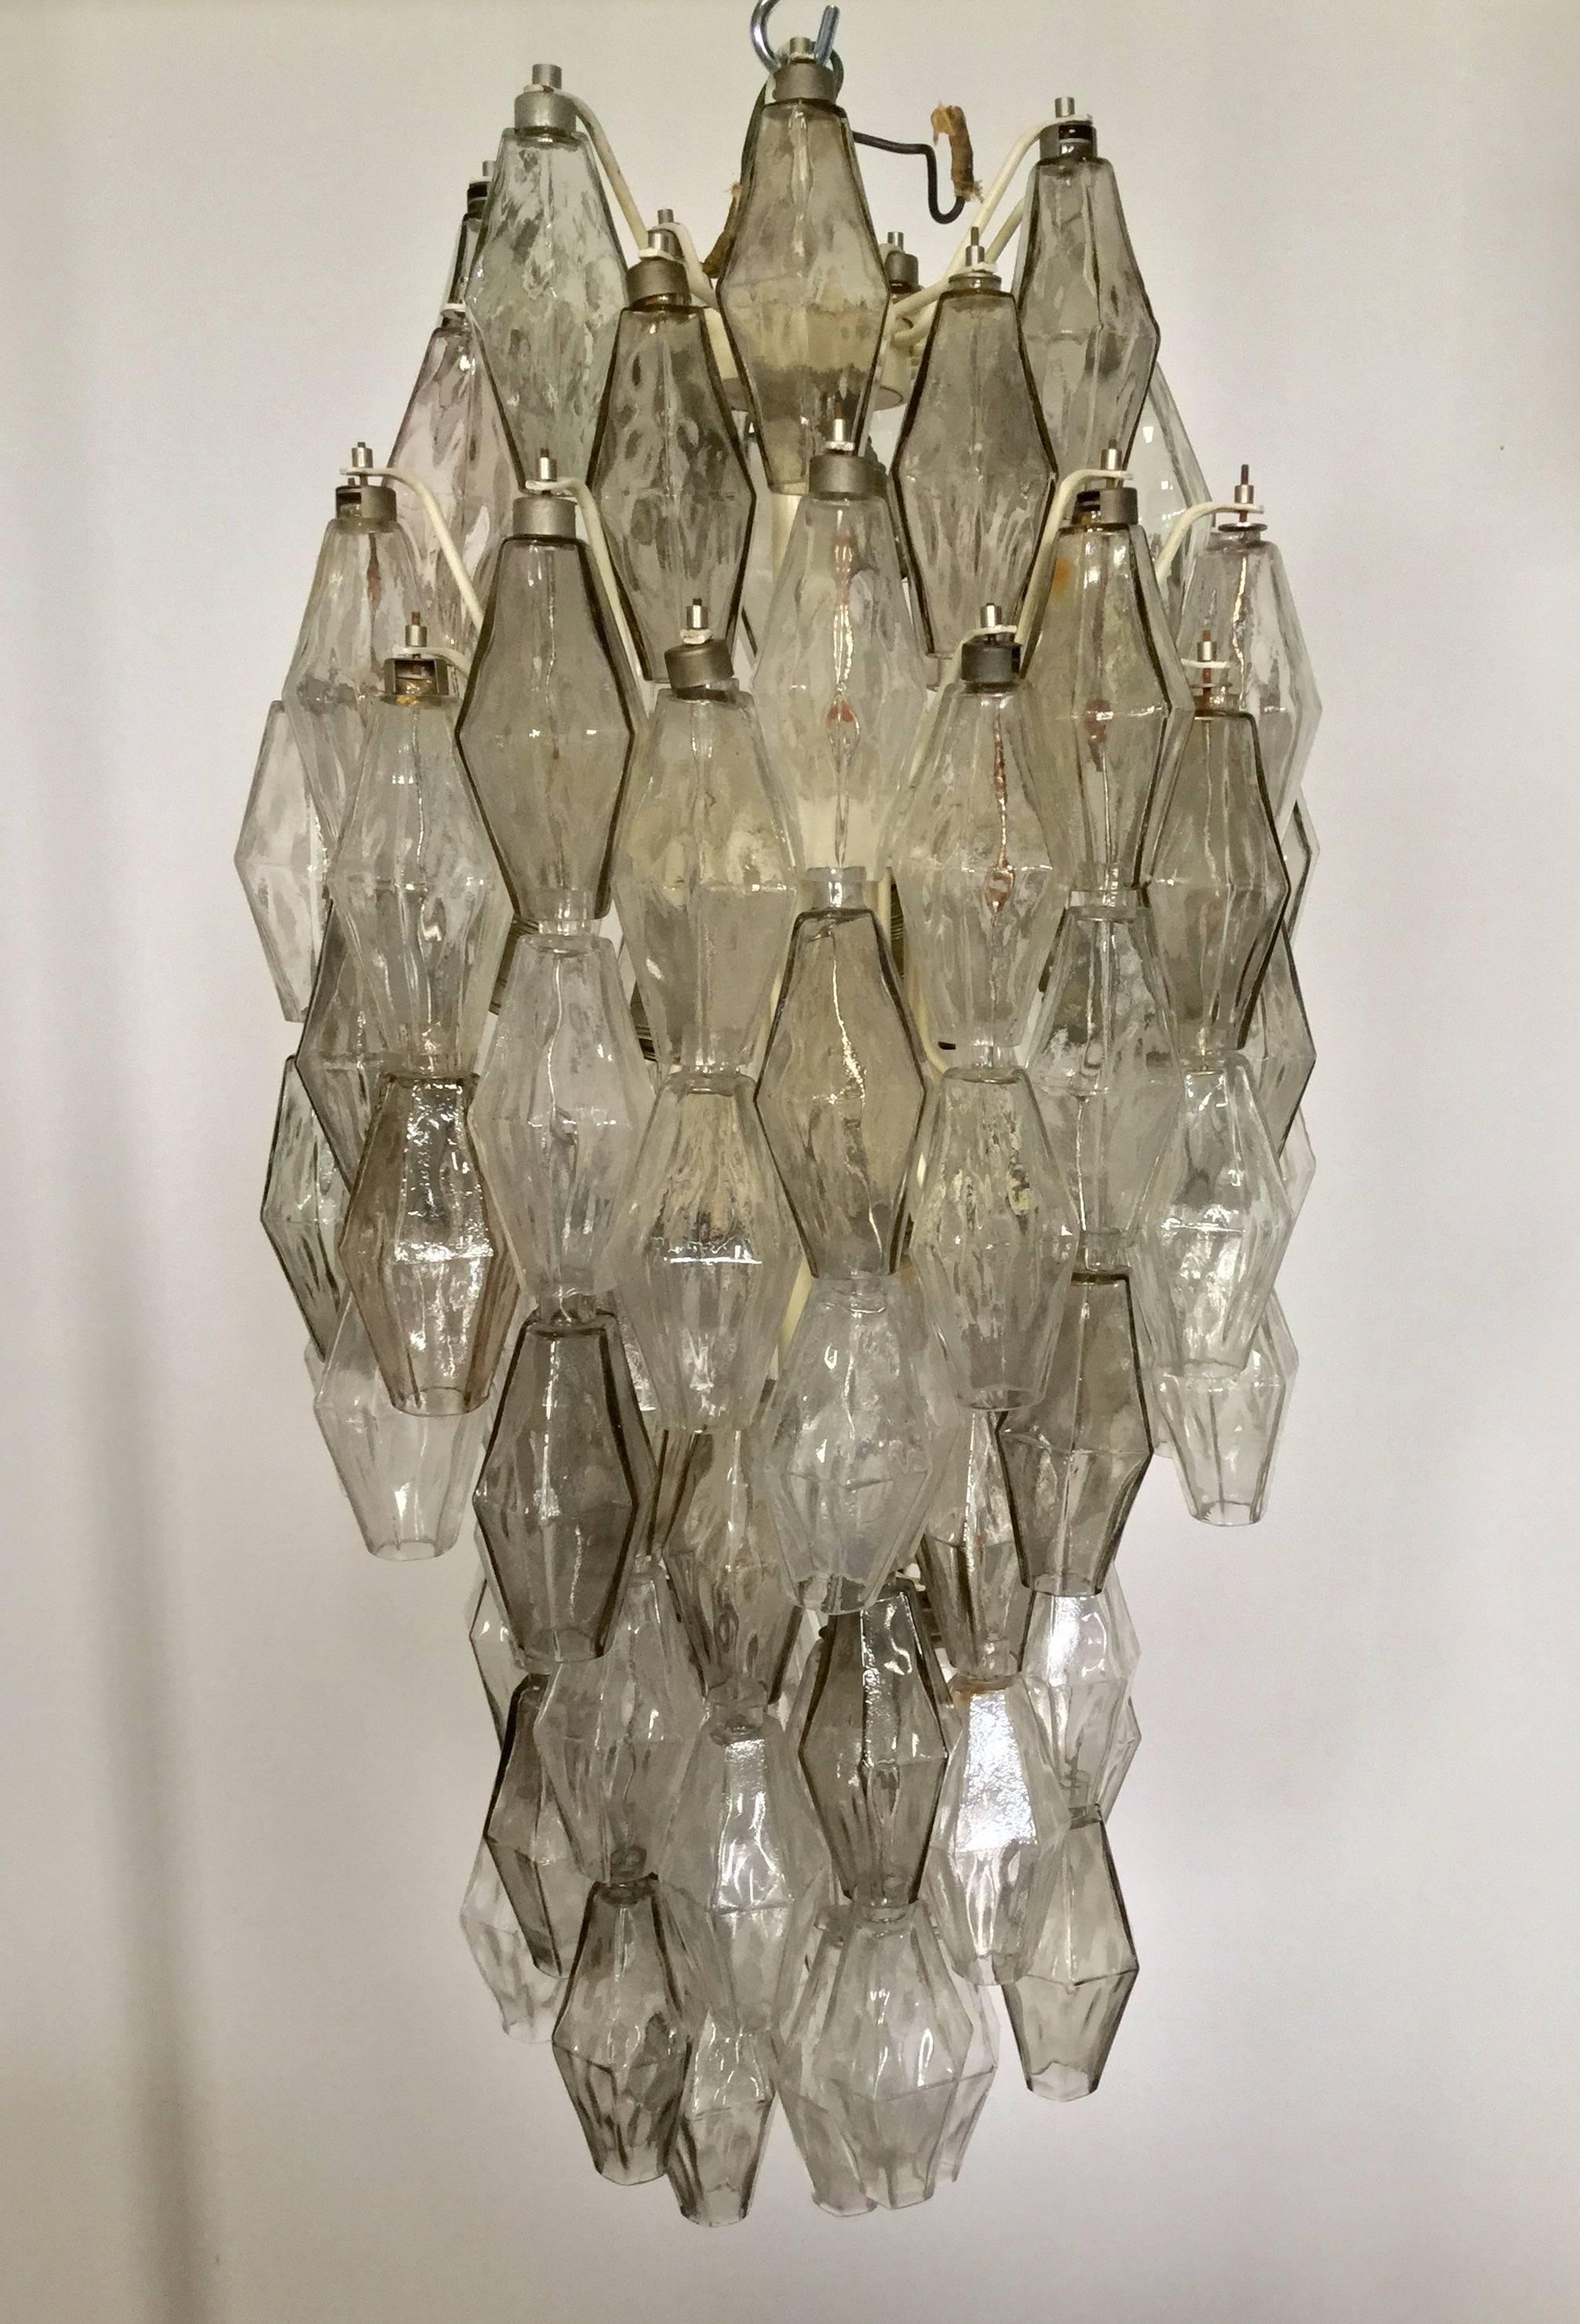 Large chandelier designed by Carlo Scarpa for Venini in 1960 
Beautiful polyhedral model with several elements white transparent and black transparent rare colors 
White lacquered metal frame original in all parts.